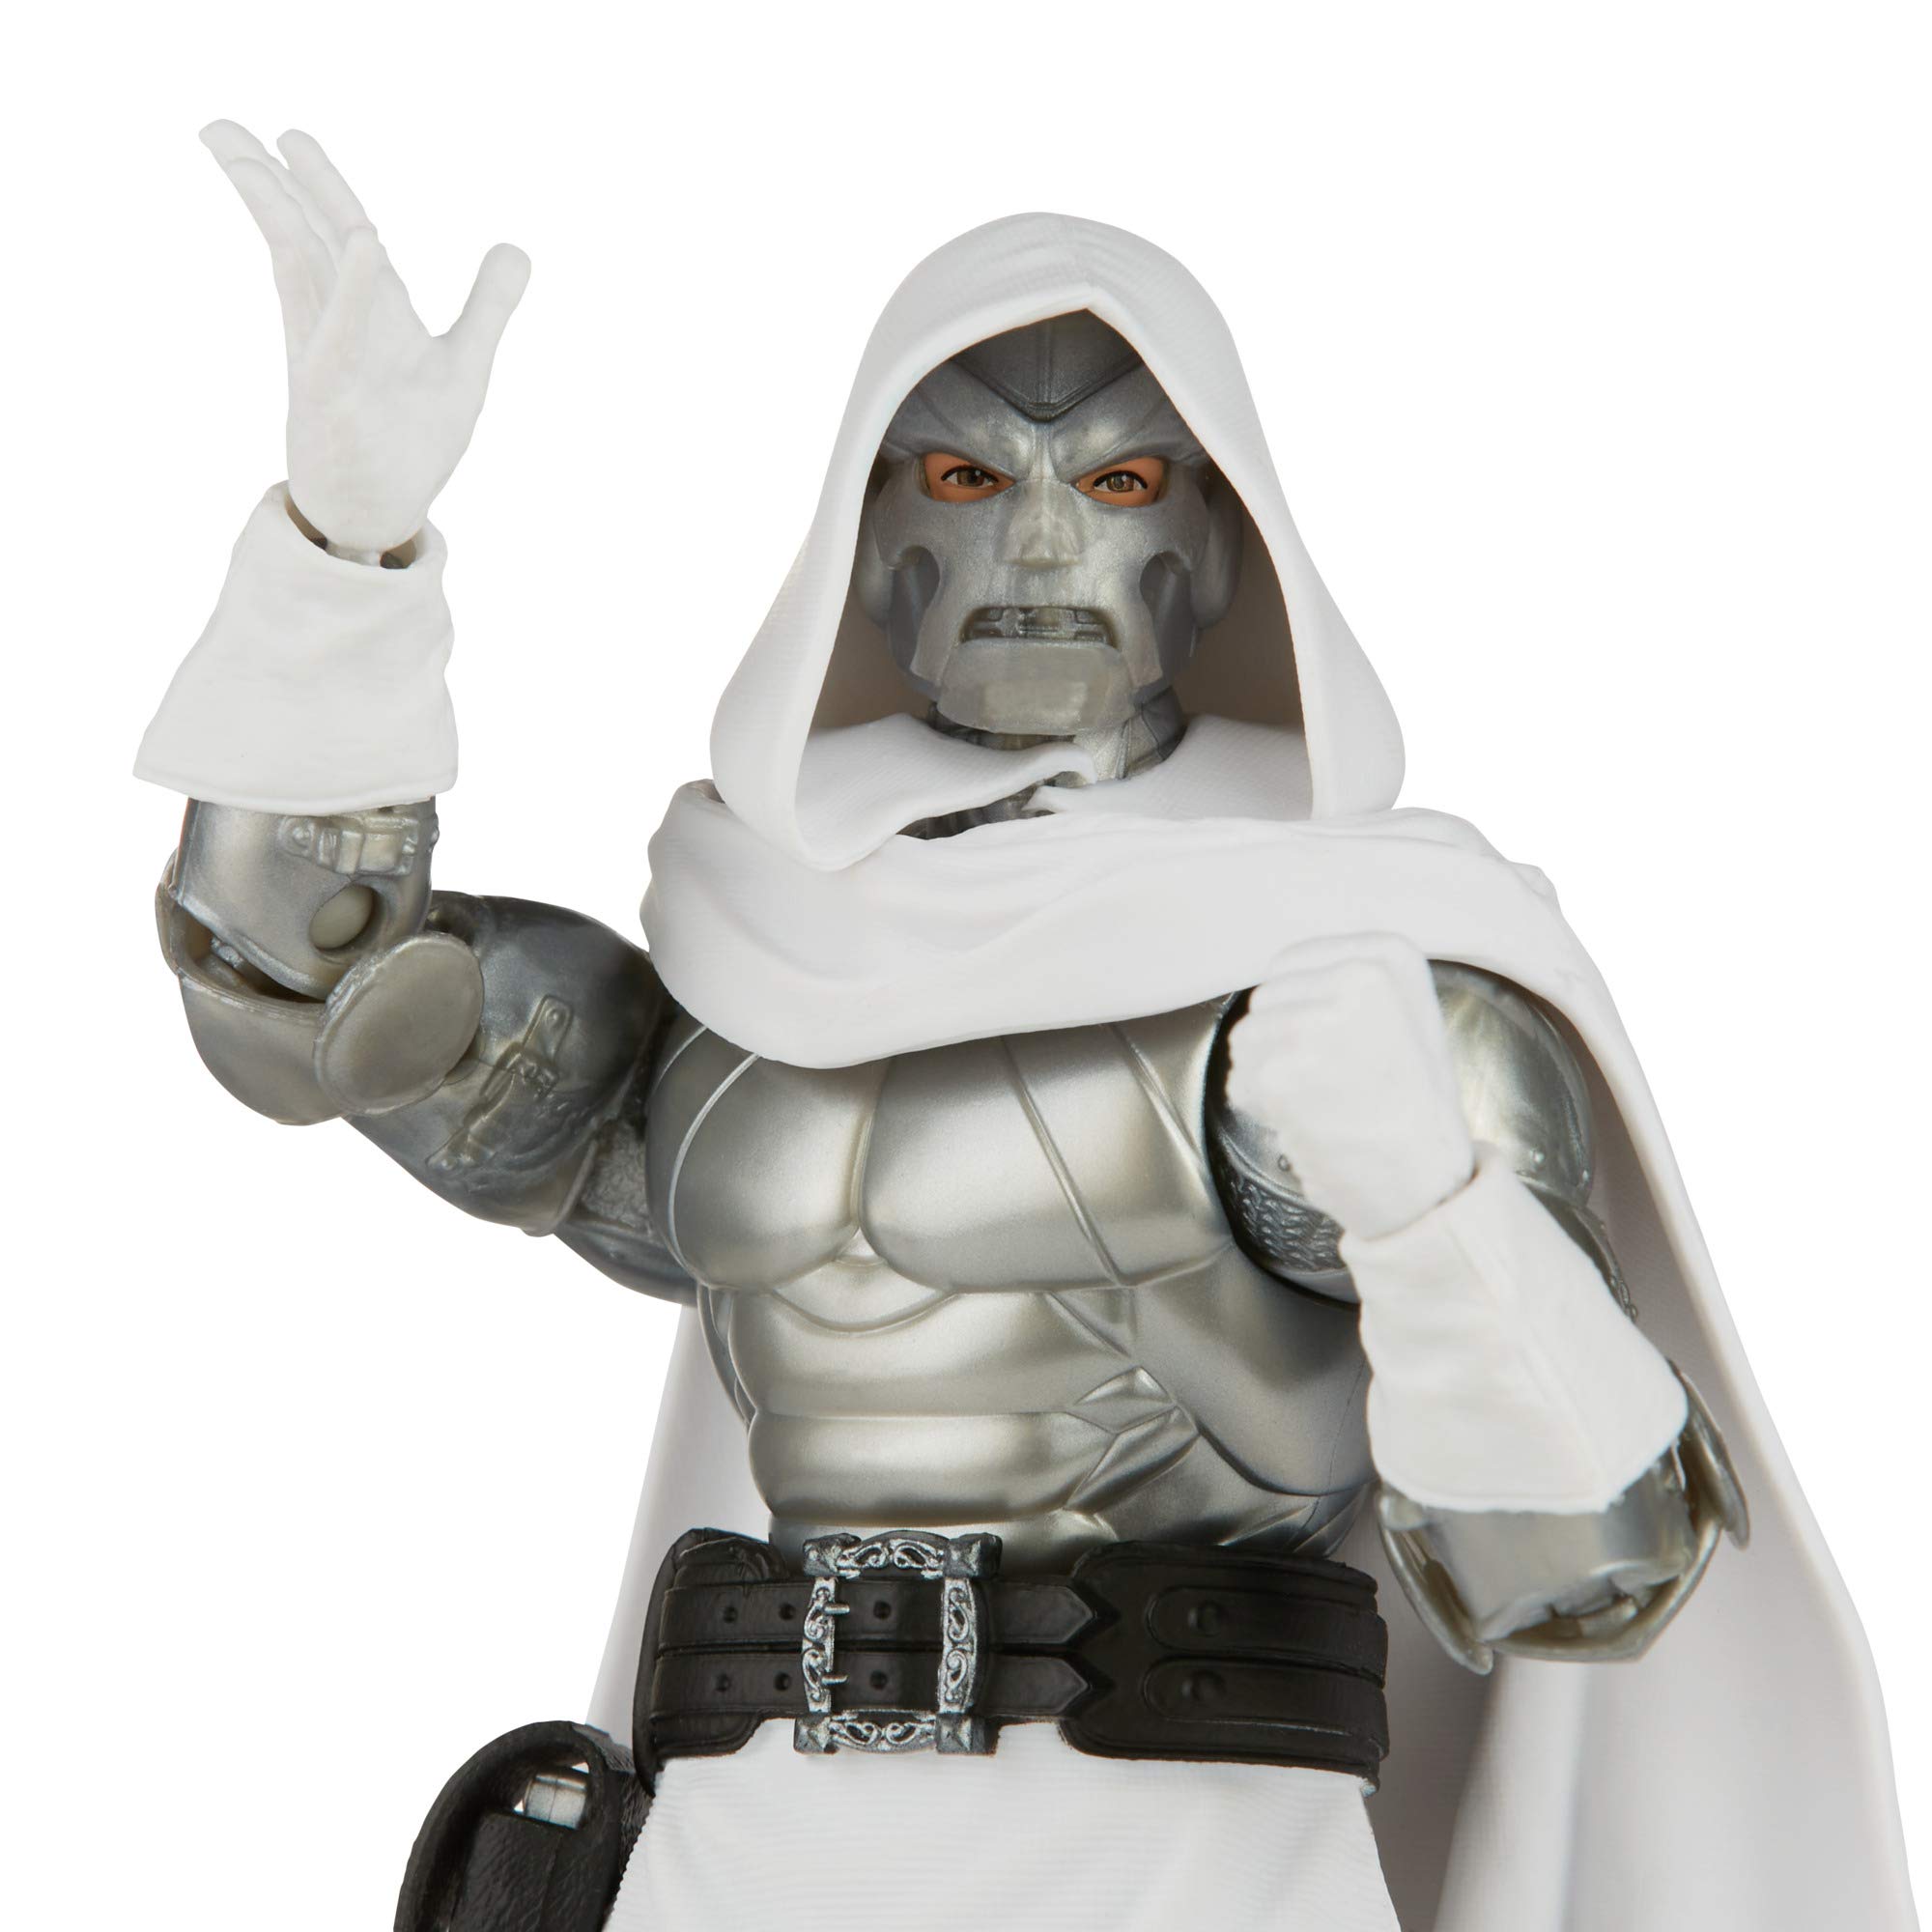 Marvel Hasbro Legends Series 6-inch Collectible Action Dr. Doom Figure and 4 Accessories